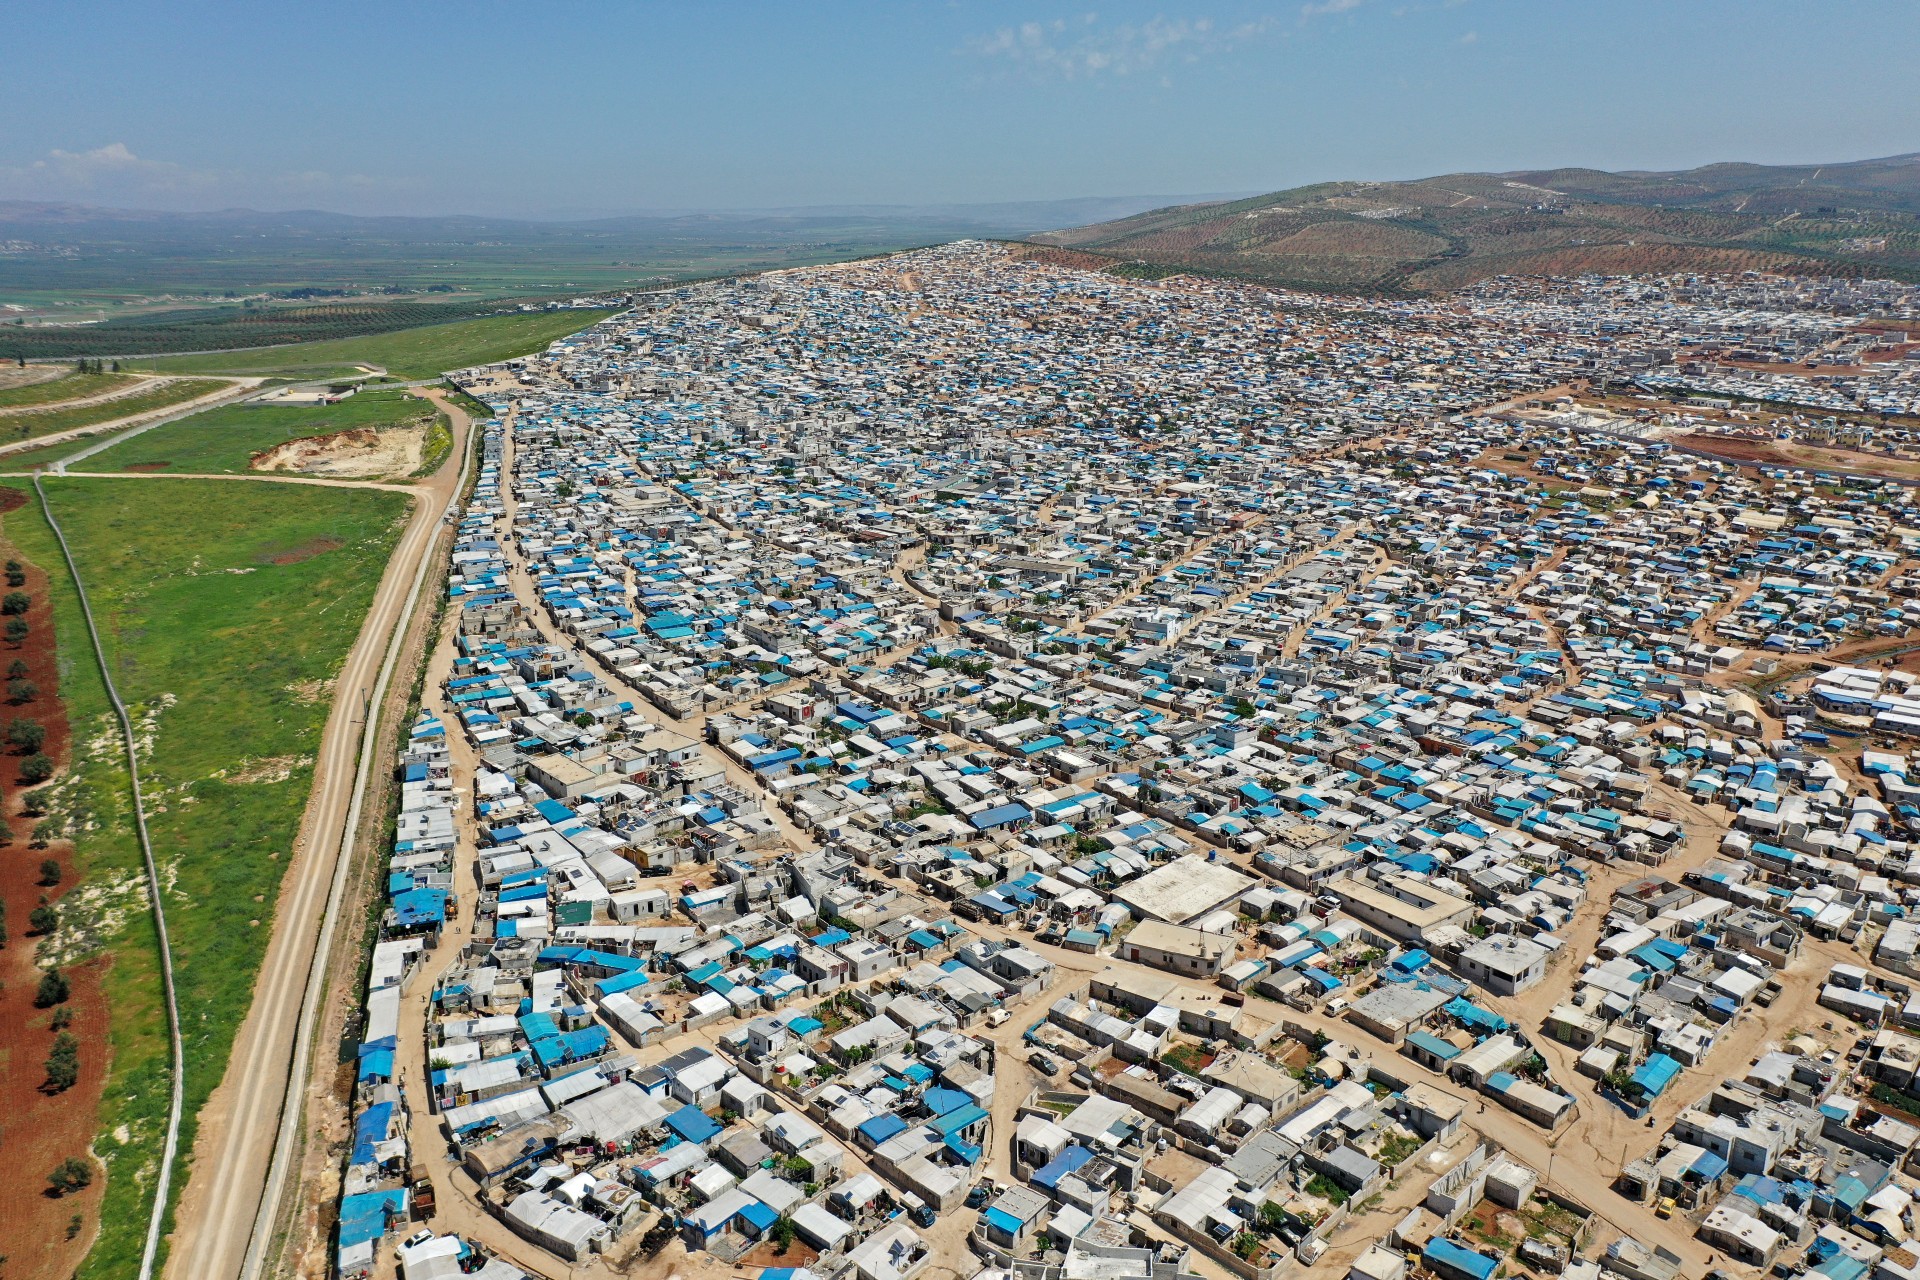 An aerial view shows the Atme camp for displaced Syrians close to the border with Turkey in Syria's northwestern Idlib province, on 19 April, 2020 (AFP)